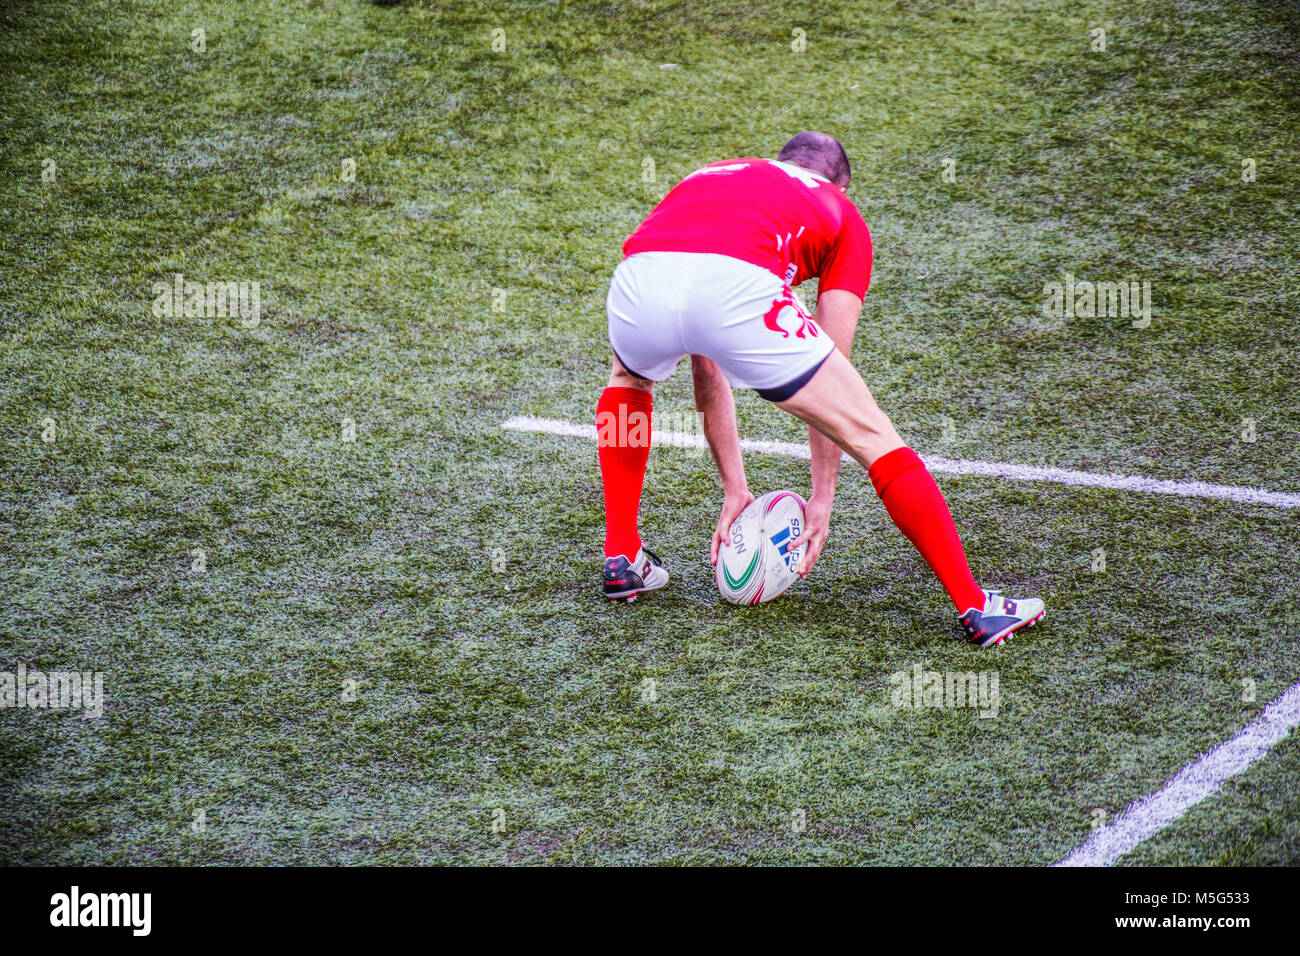 GENOA, ITALY APRIL 2015 -  Rugby player grabs the oval ball Stock Photo